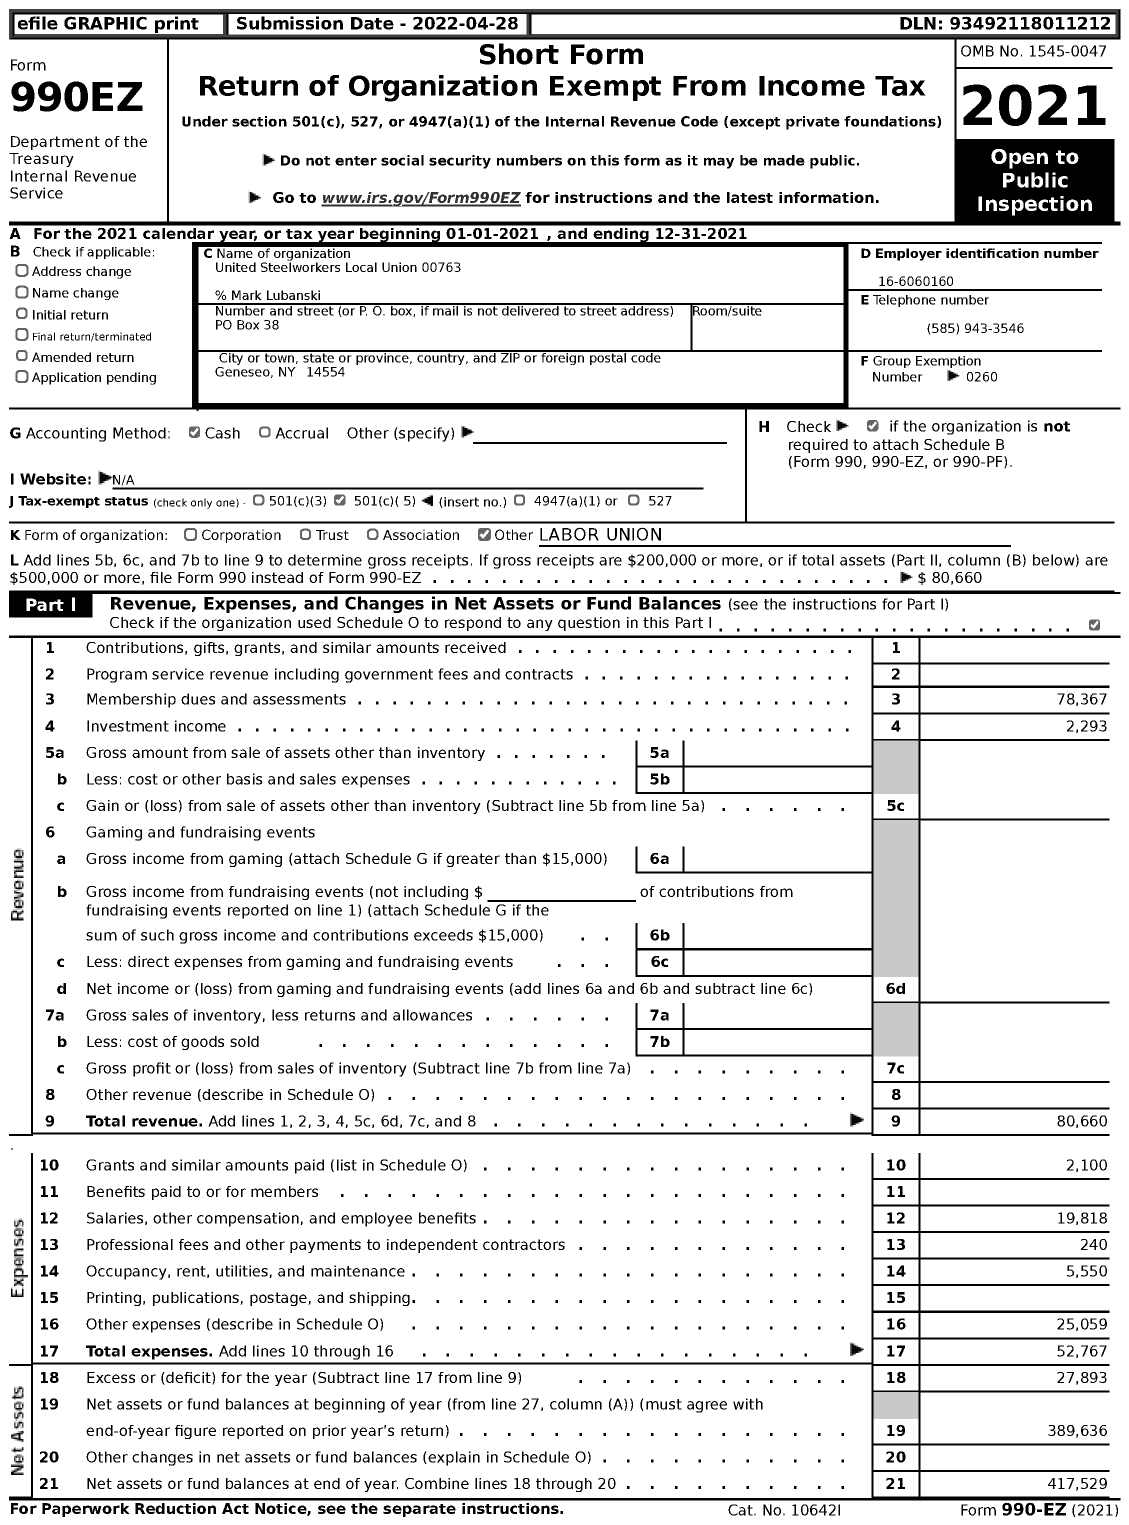 Image of first page of 2021 Form 990EZ for United Steelworkers - 00763 Local